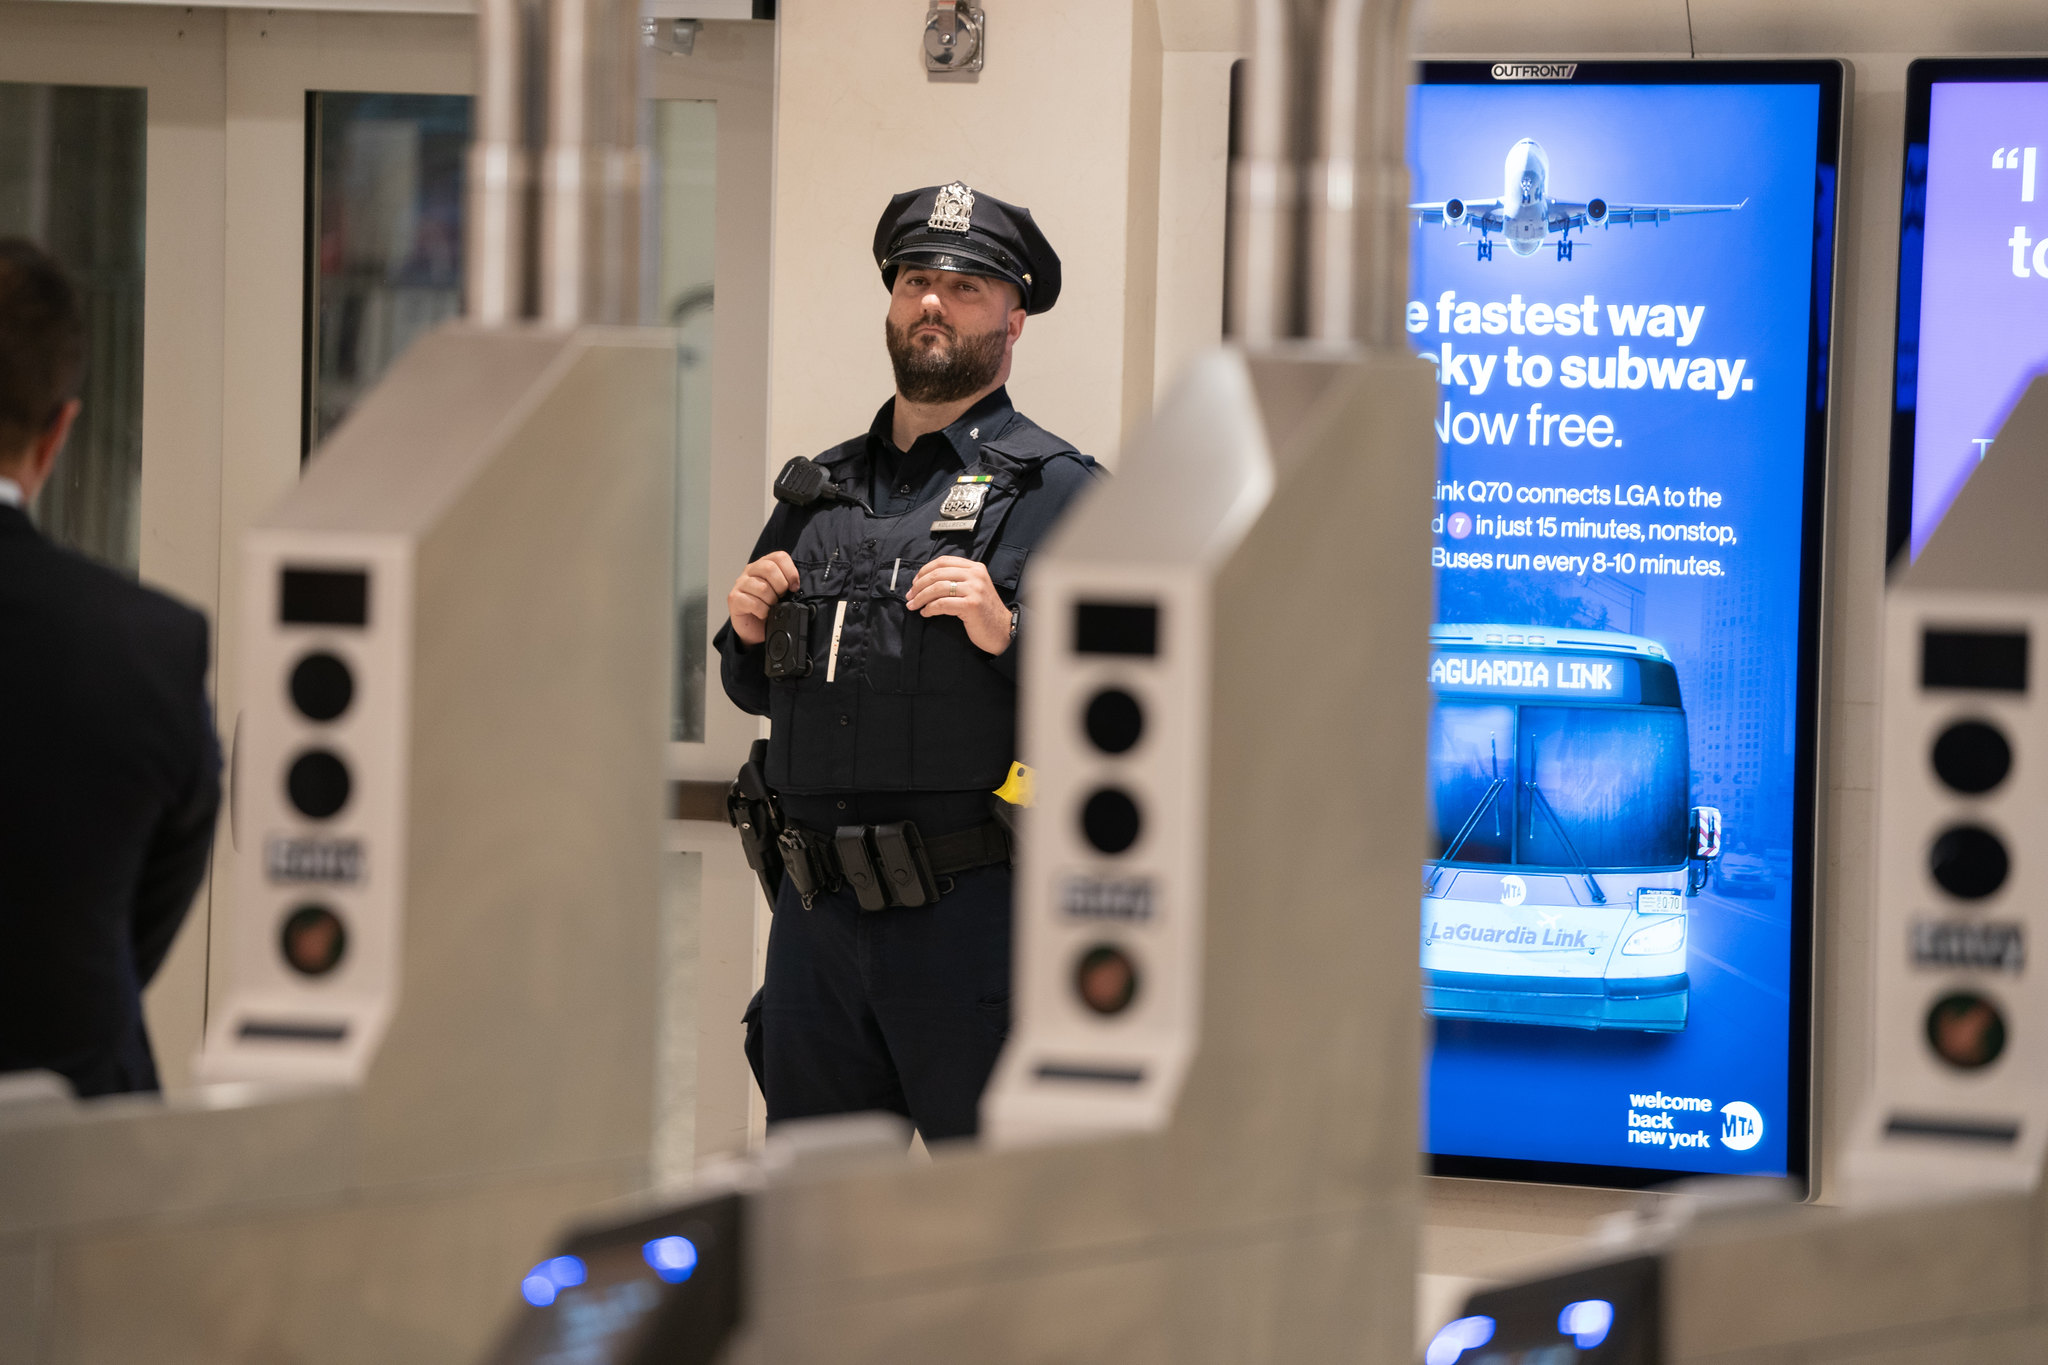 An NYPD officer stands watch outside a subway turnstile.